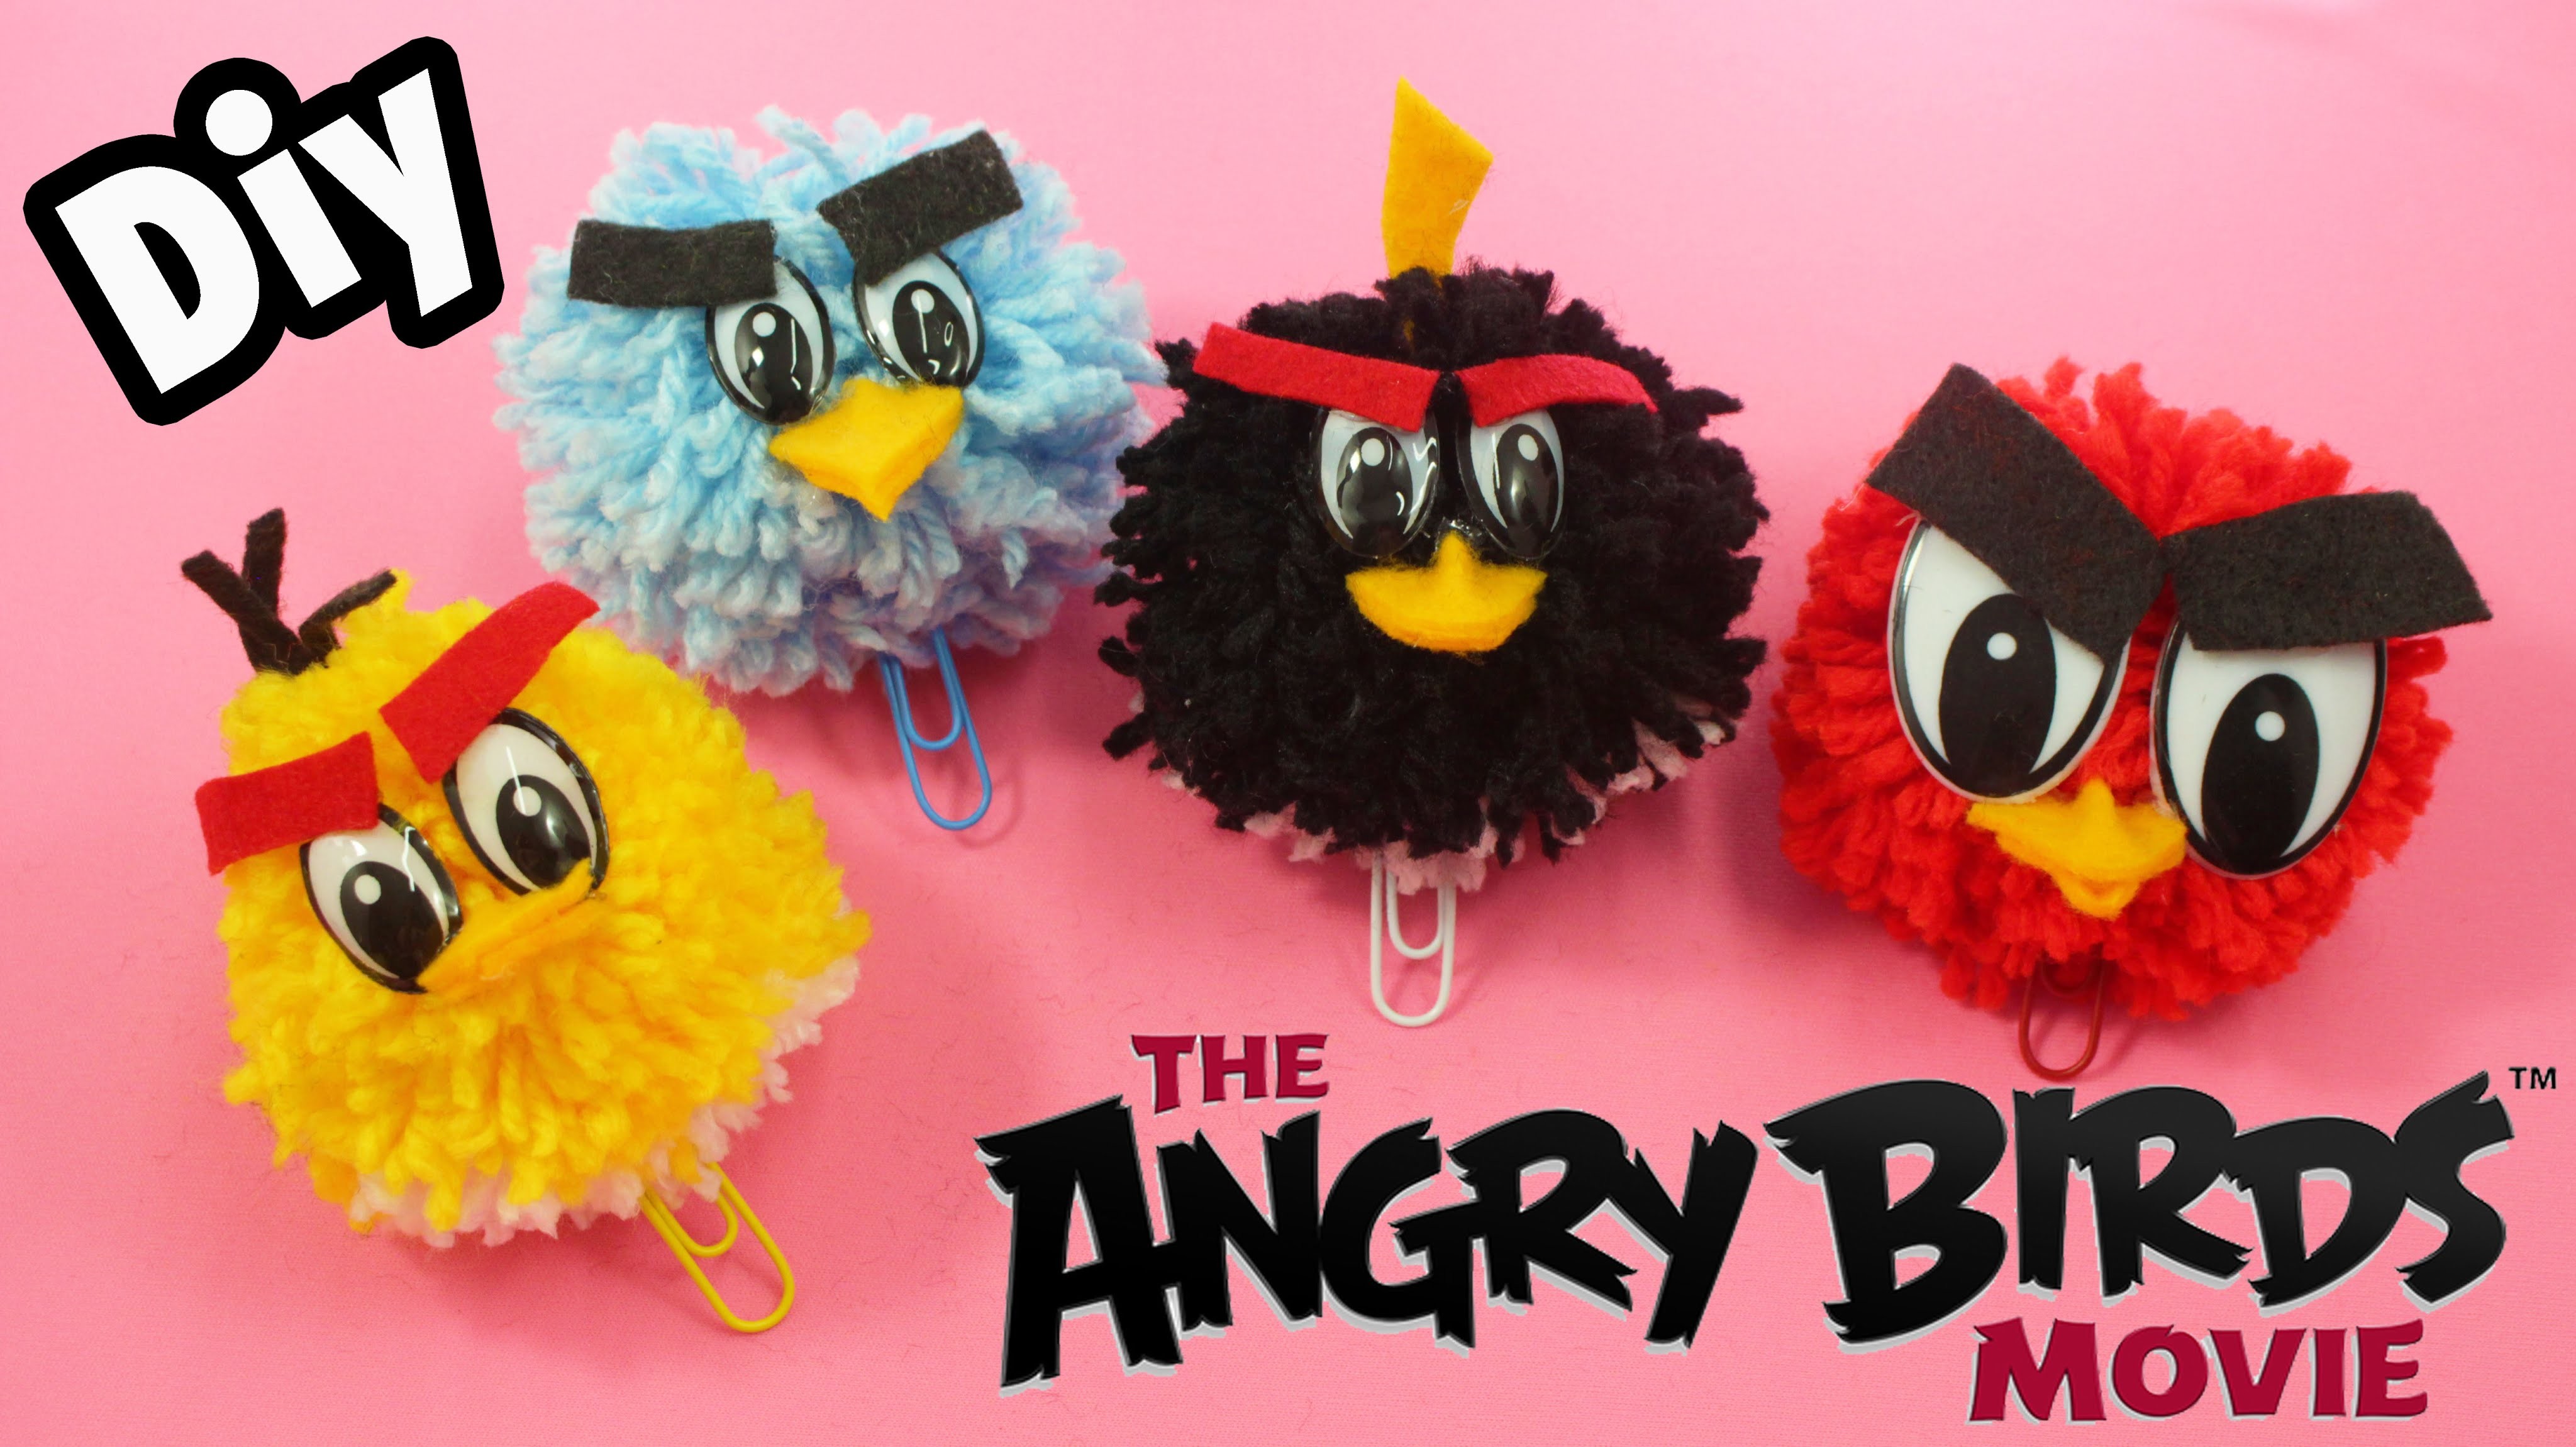 DIY ANGRY BIRDS TOYS - HOW TO MAKE ANGRY BIRDS BOOKMARK (•◡•)|